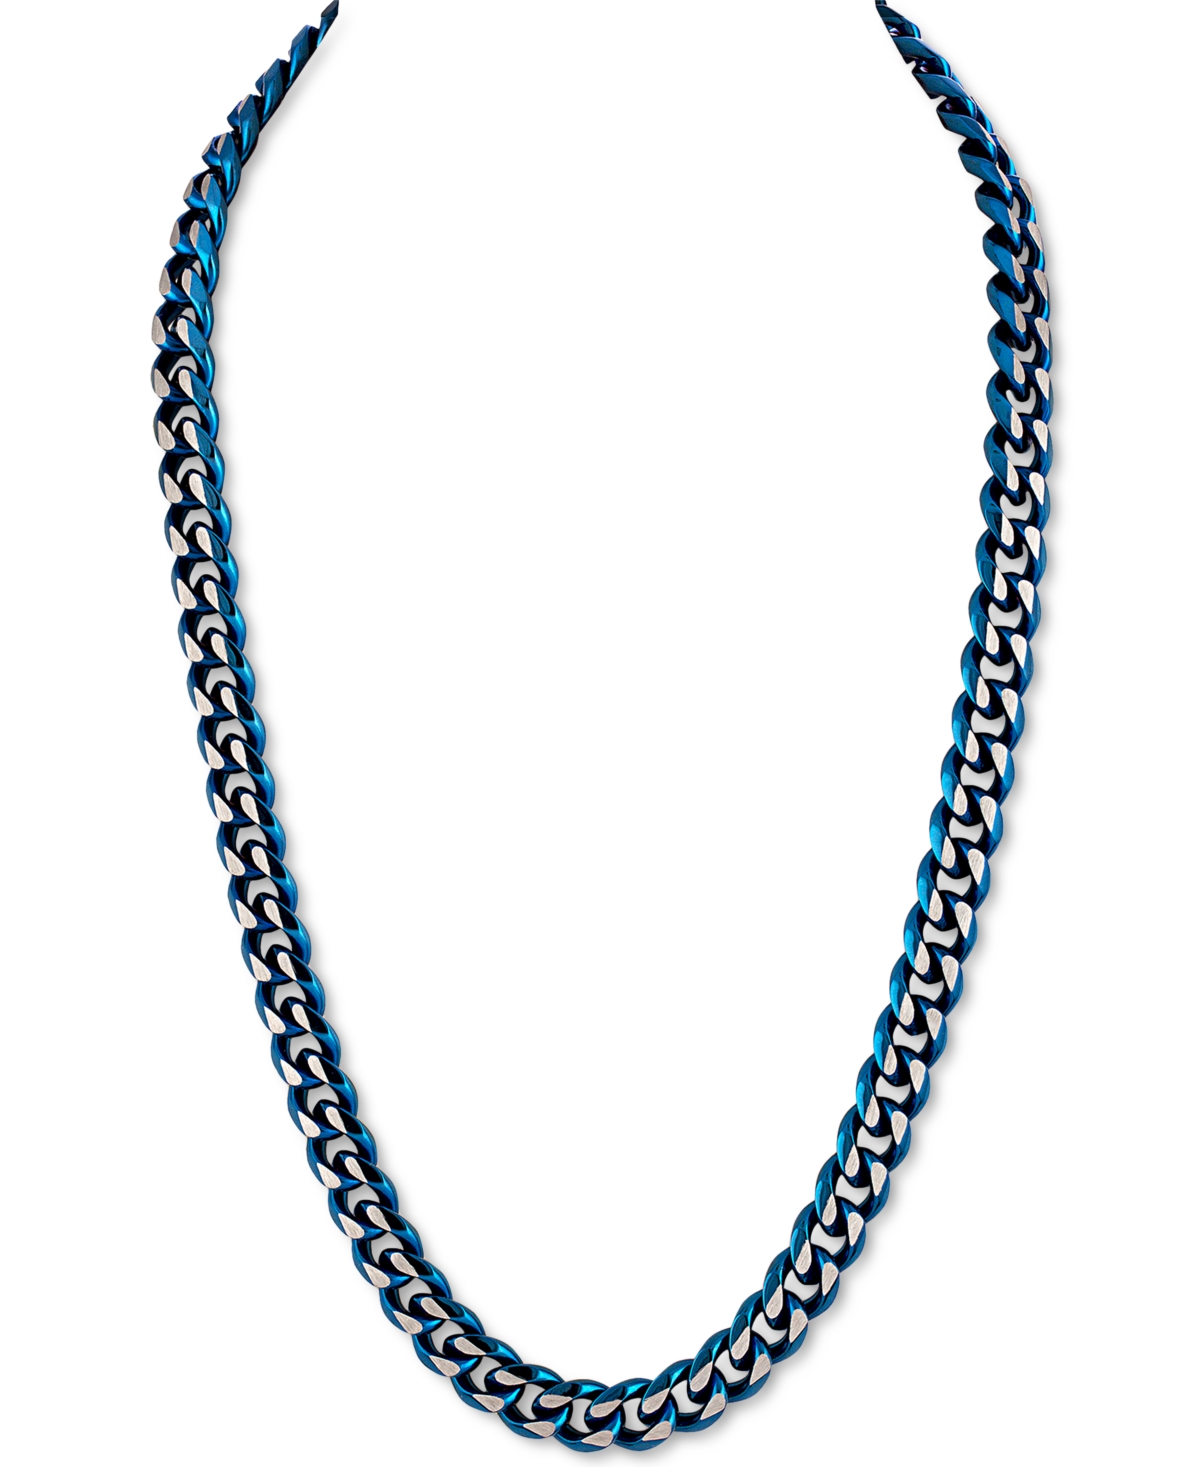 Two-Tone Curb Link 22"Chain Necklace, Created for Macy's - Gold-Tone